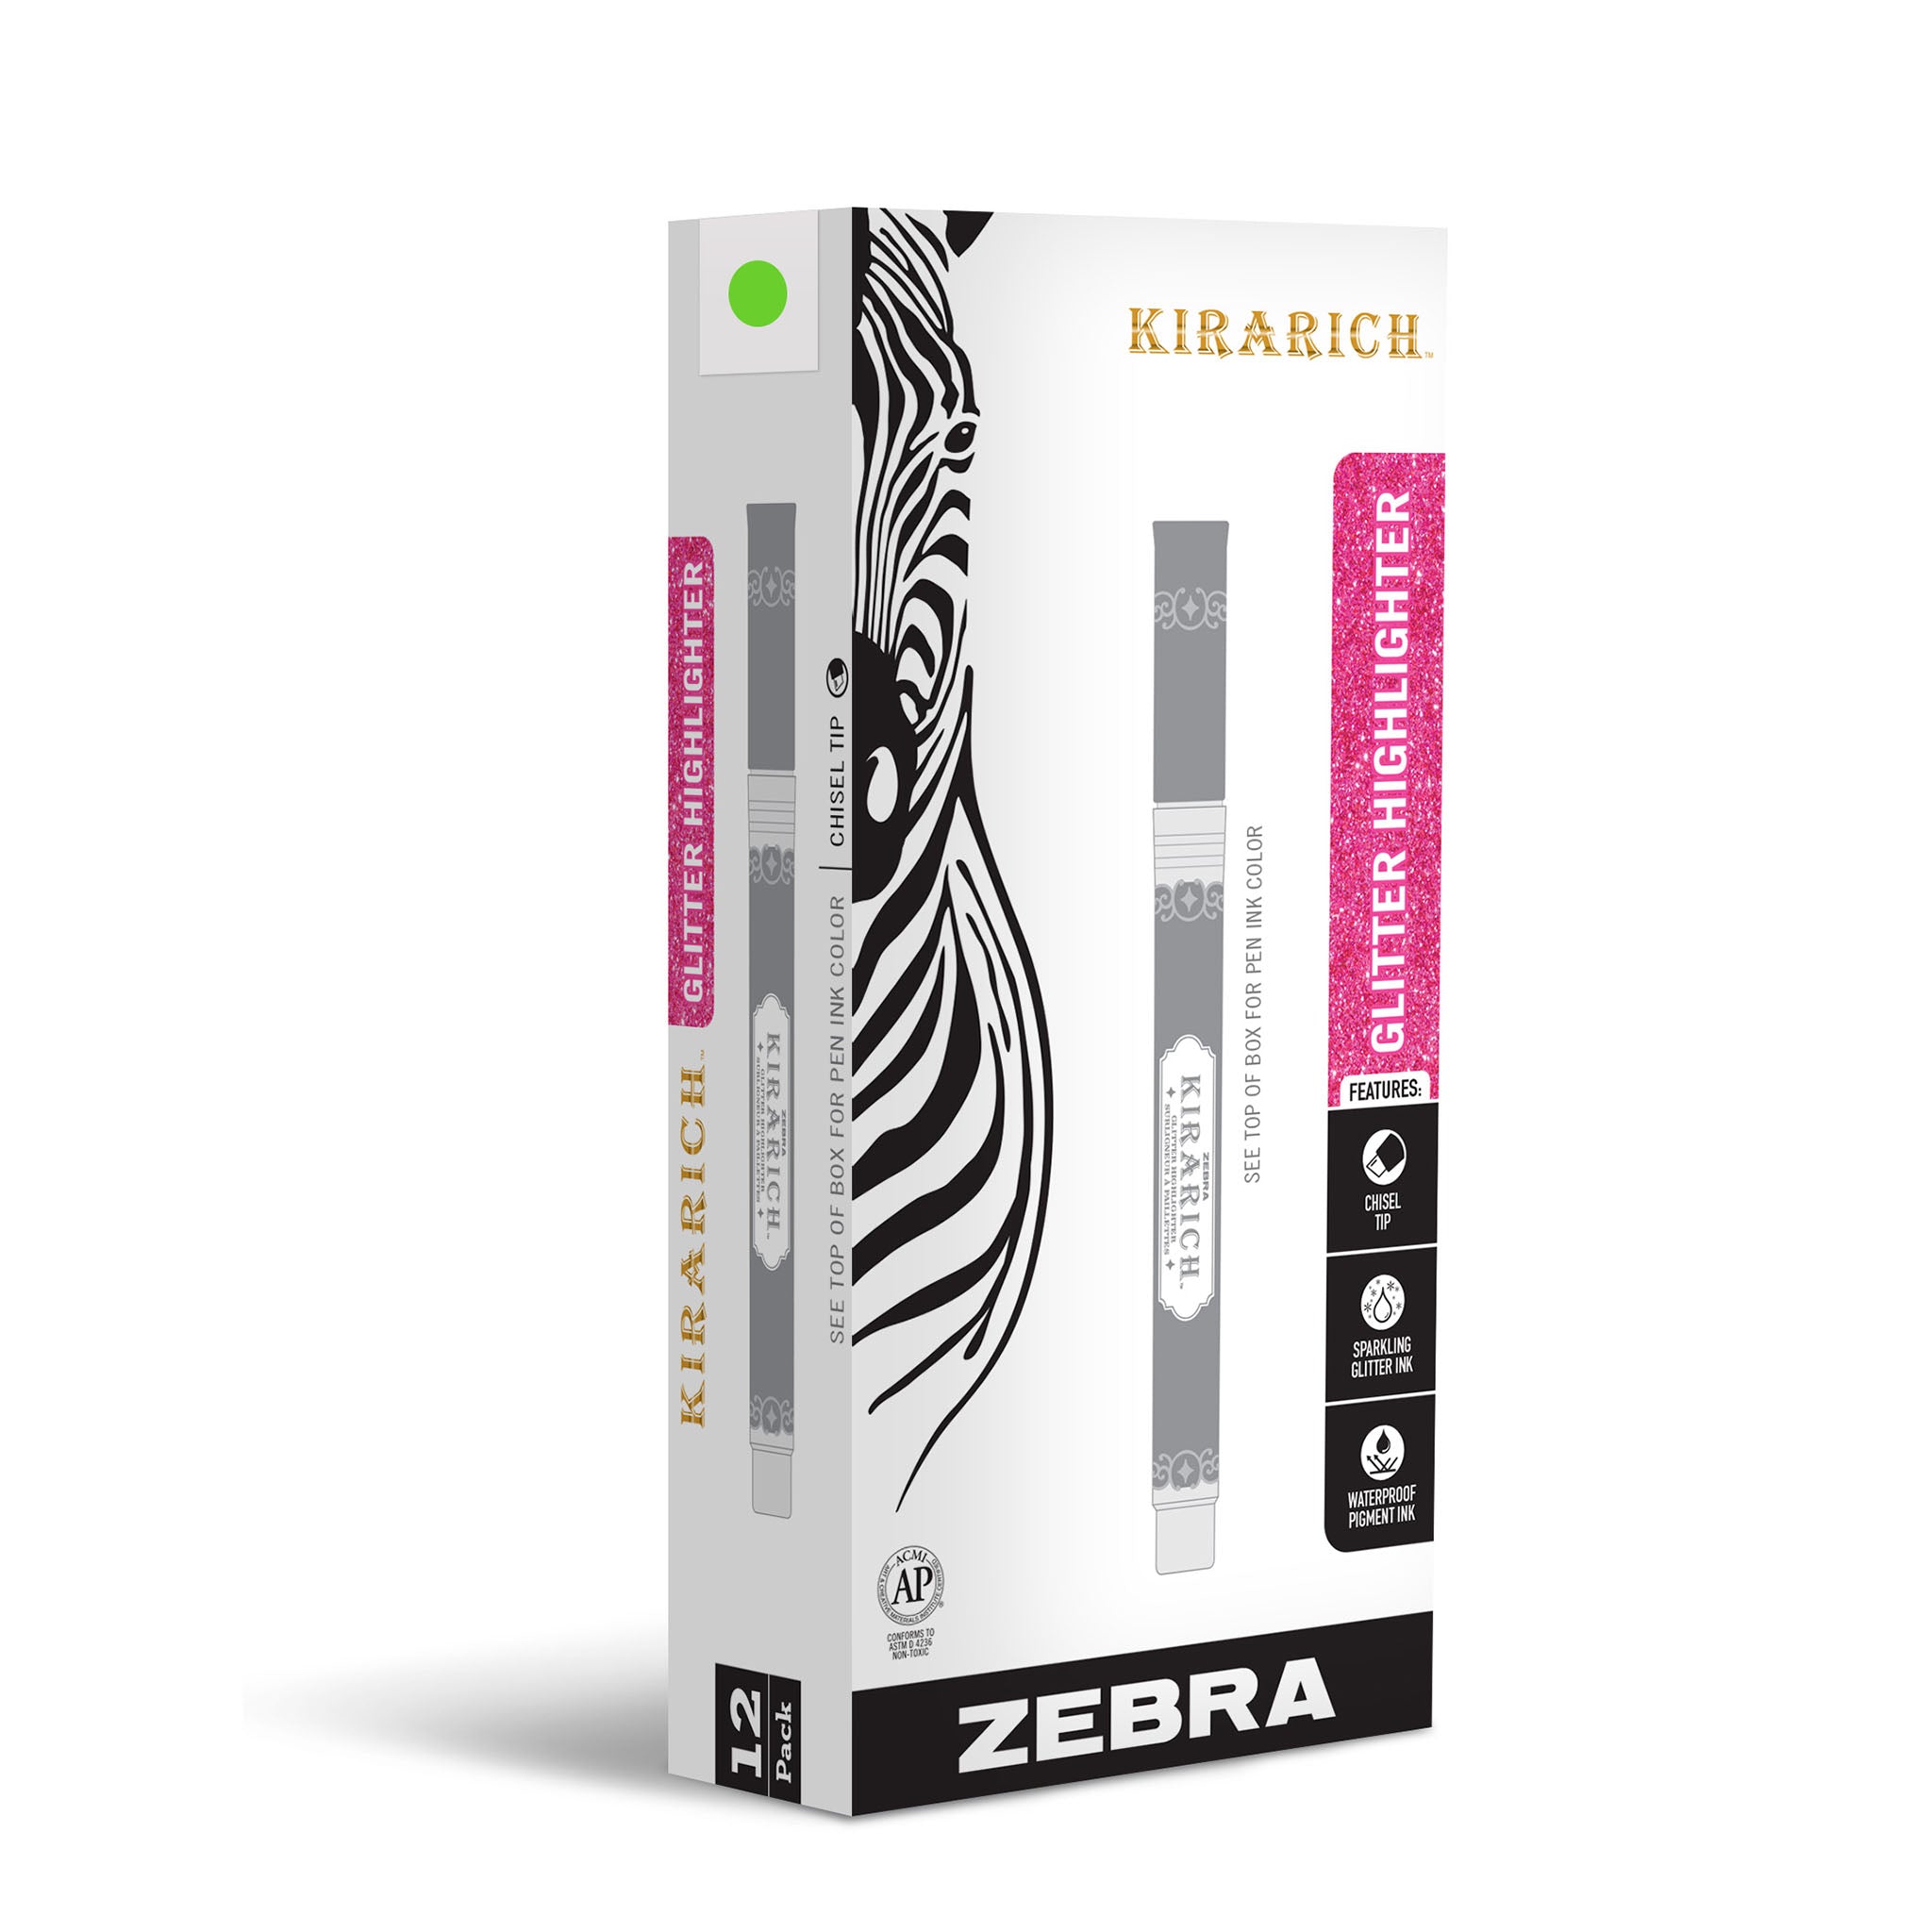 Have you ever seen GLITTER HIGHLIGHTERS?! The Zebra Kirarch are SO SPARKLY!  #shorts 